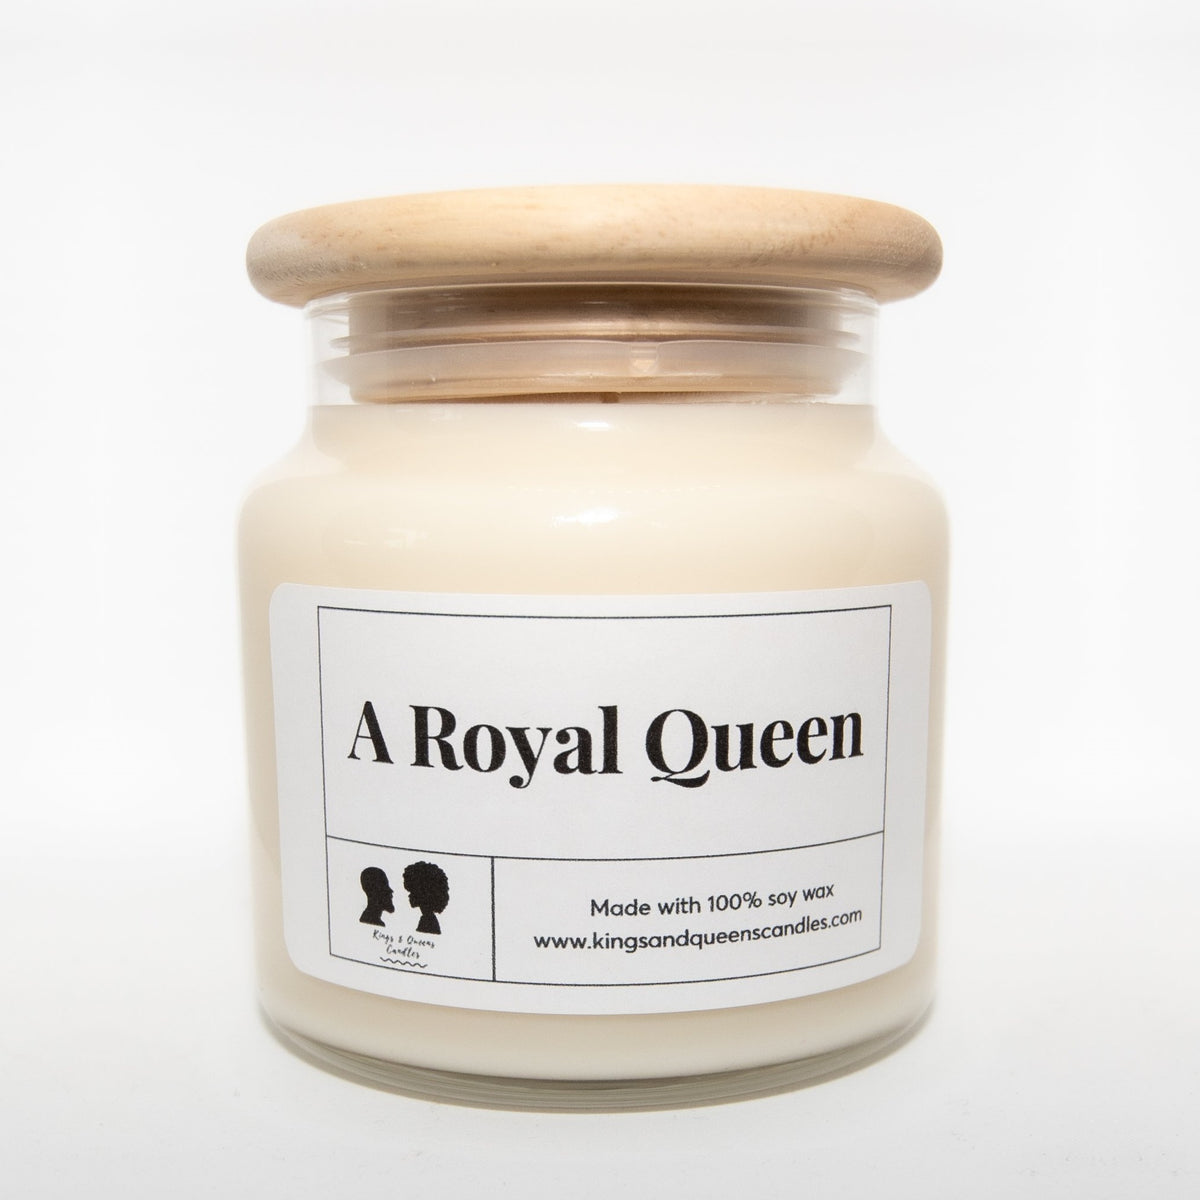 A Royal Queen - Kings and Queens Candles